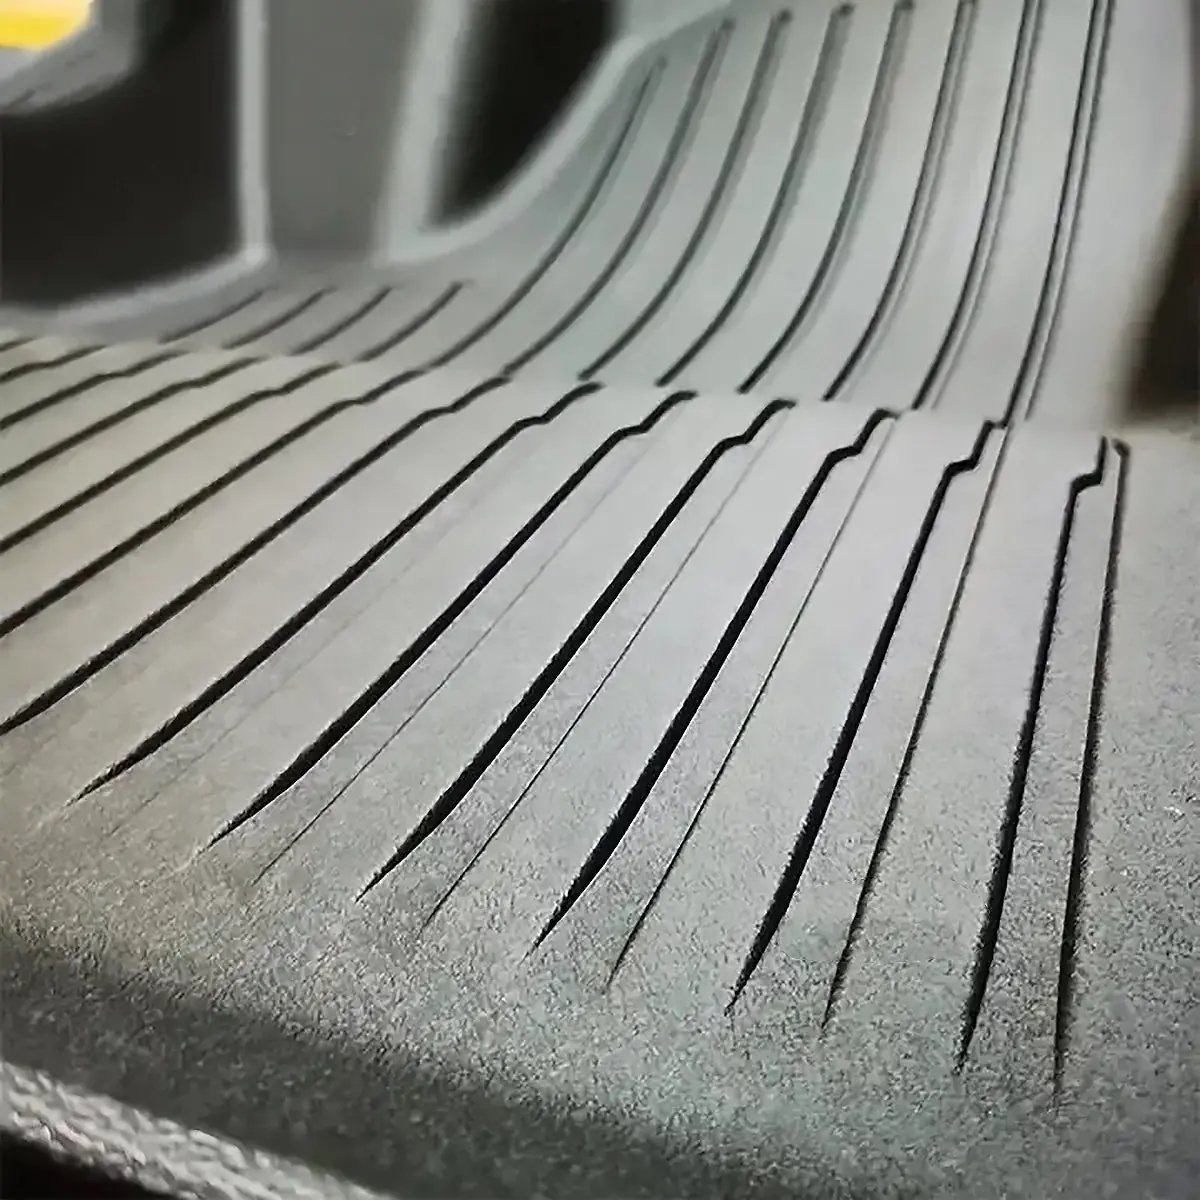 Enhance Your Tesla Model 3 with Adreama All-Weather Floor Mats